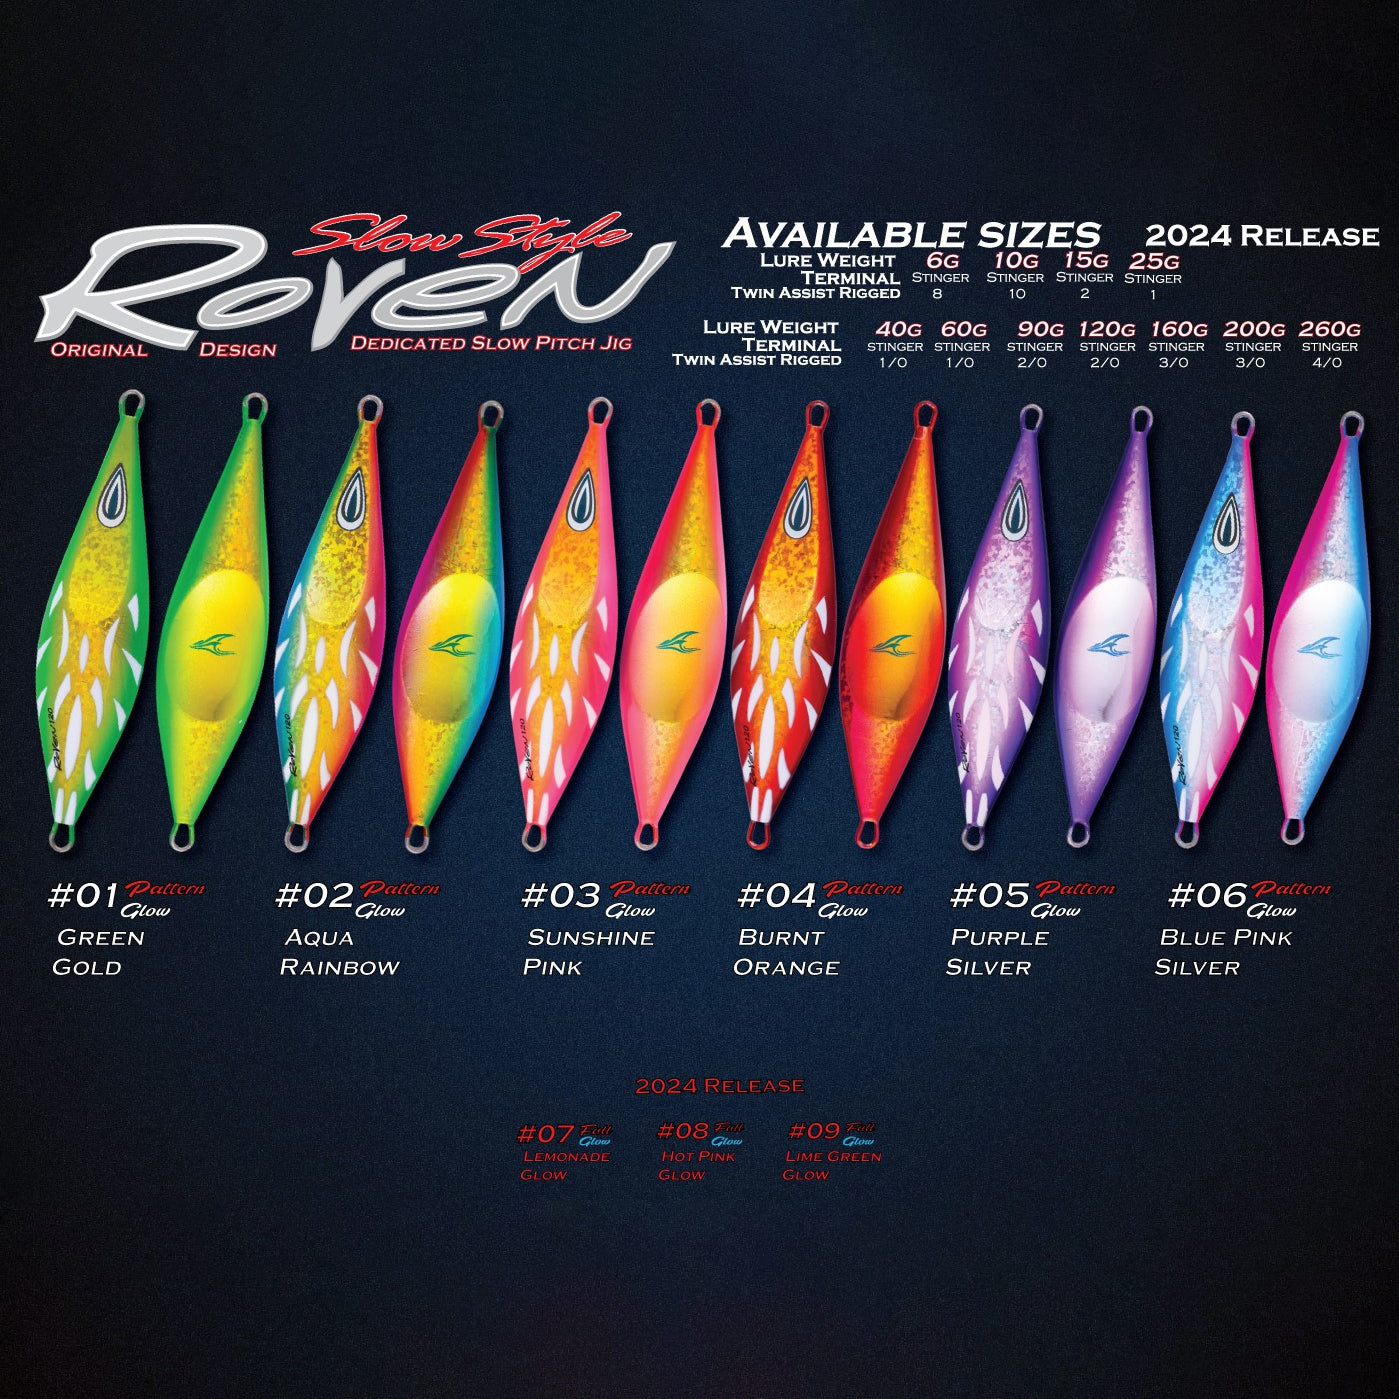 Oceans Legacy Roven 160g - Compleat Angler Nedlands Pro Tackle